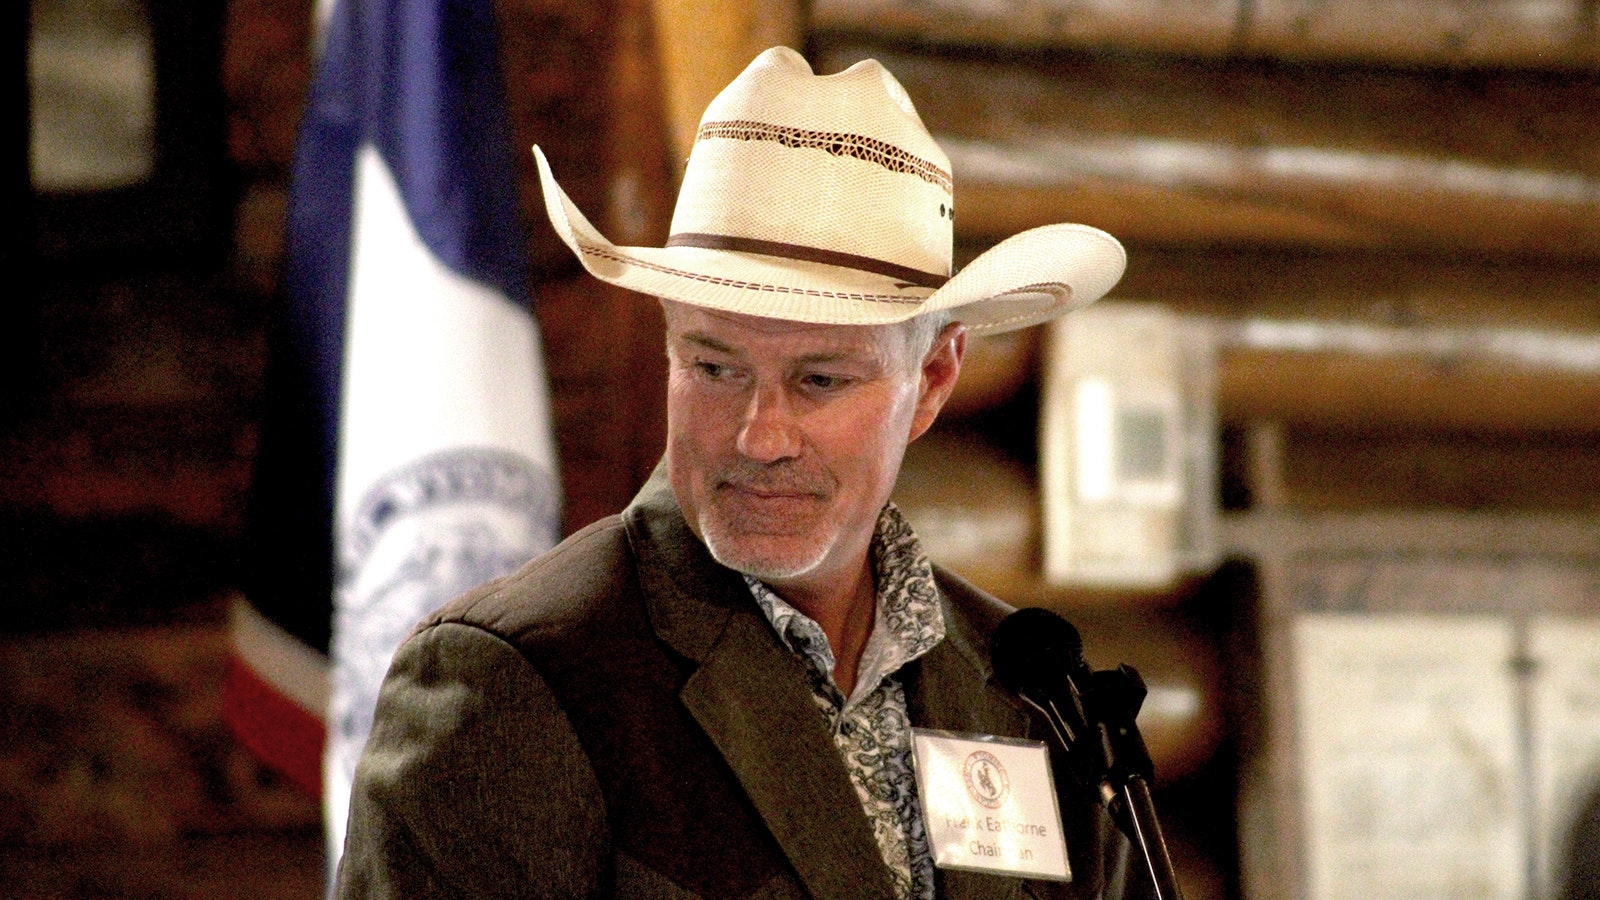 At a Saturday meeting of the Wyoming Republican Central Committee in Laramie, Wyoming GOP Chairman Frank Eathorne doesn't want the Republican National Committee to donate to gay rodeos and LGBTQ causes.